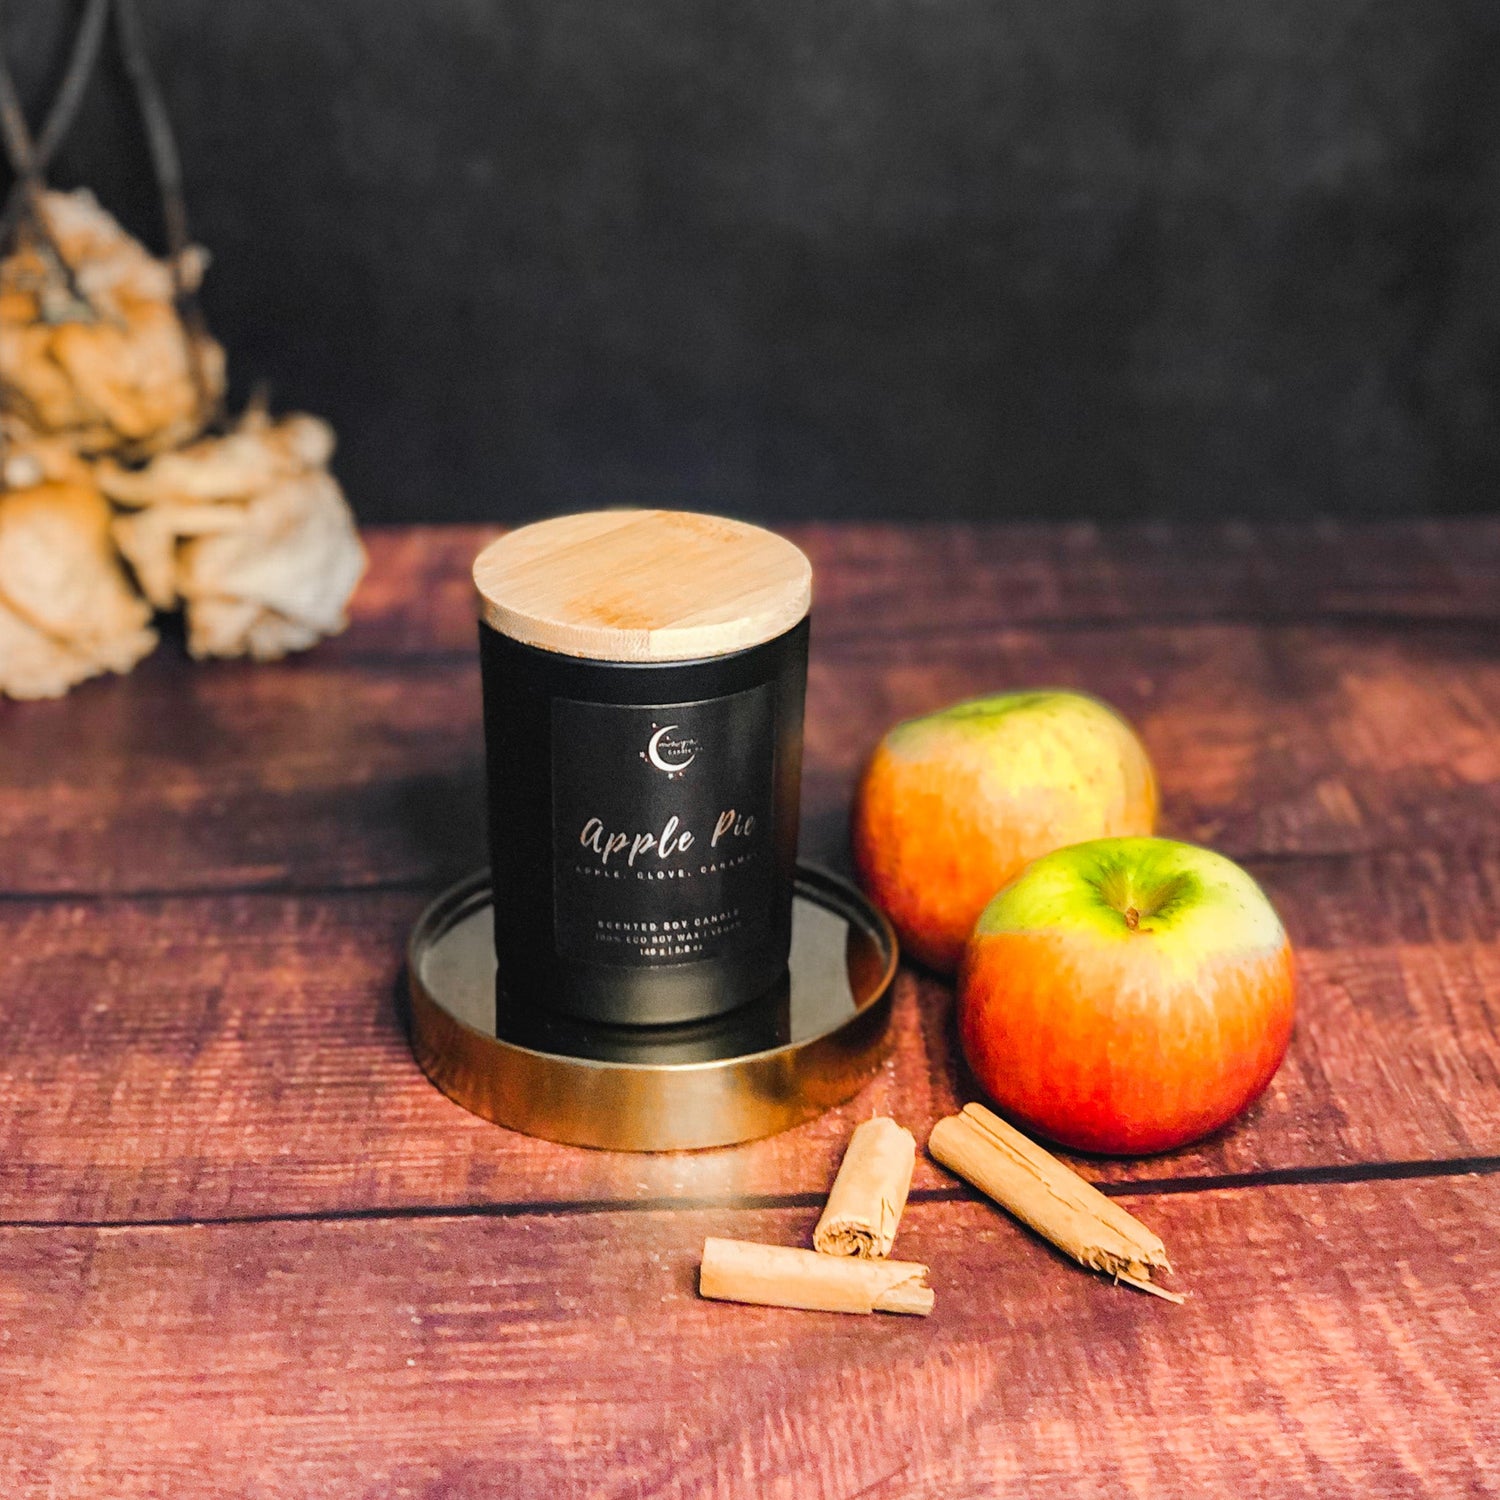 Apple Pie - Fall Scent - Maya Candle Co